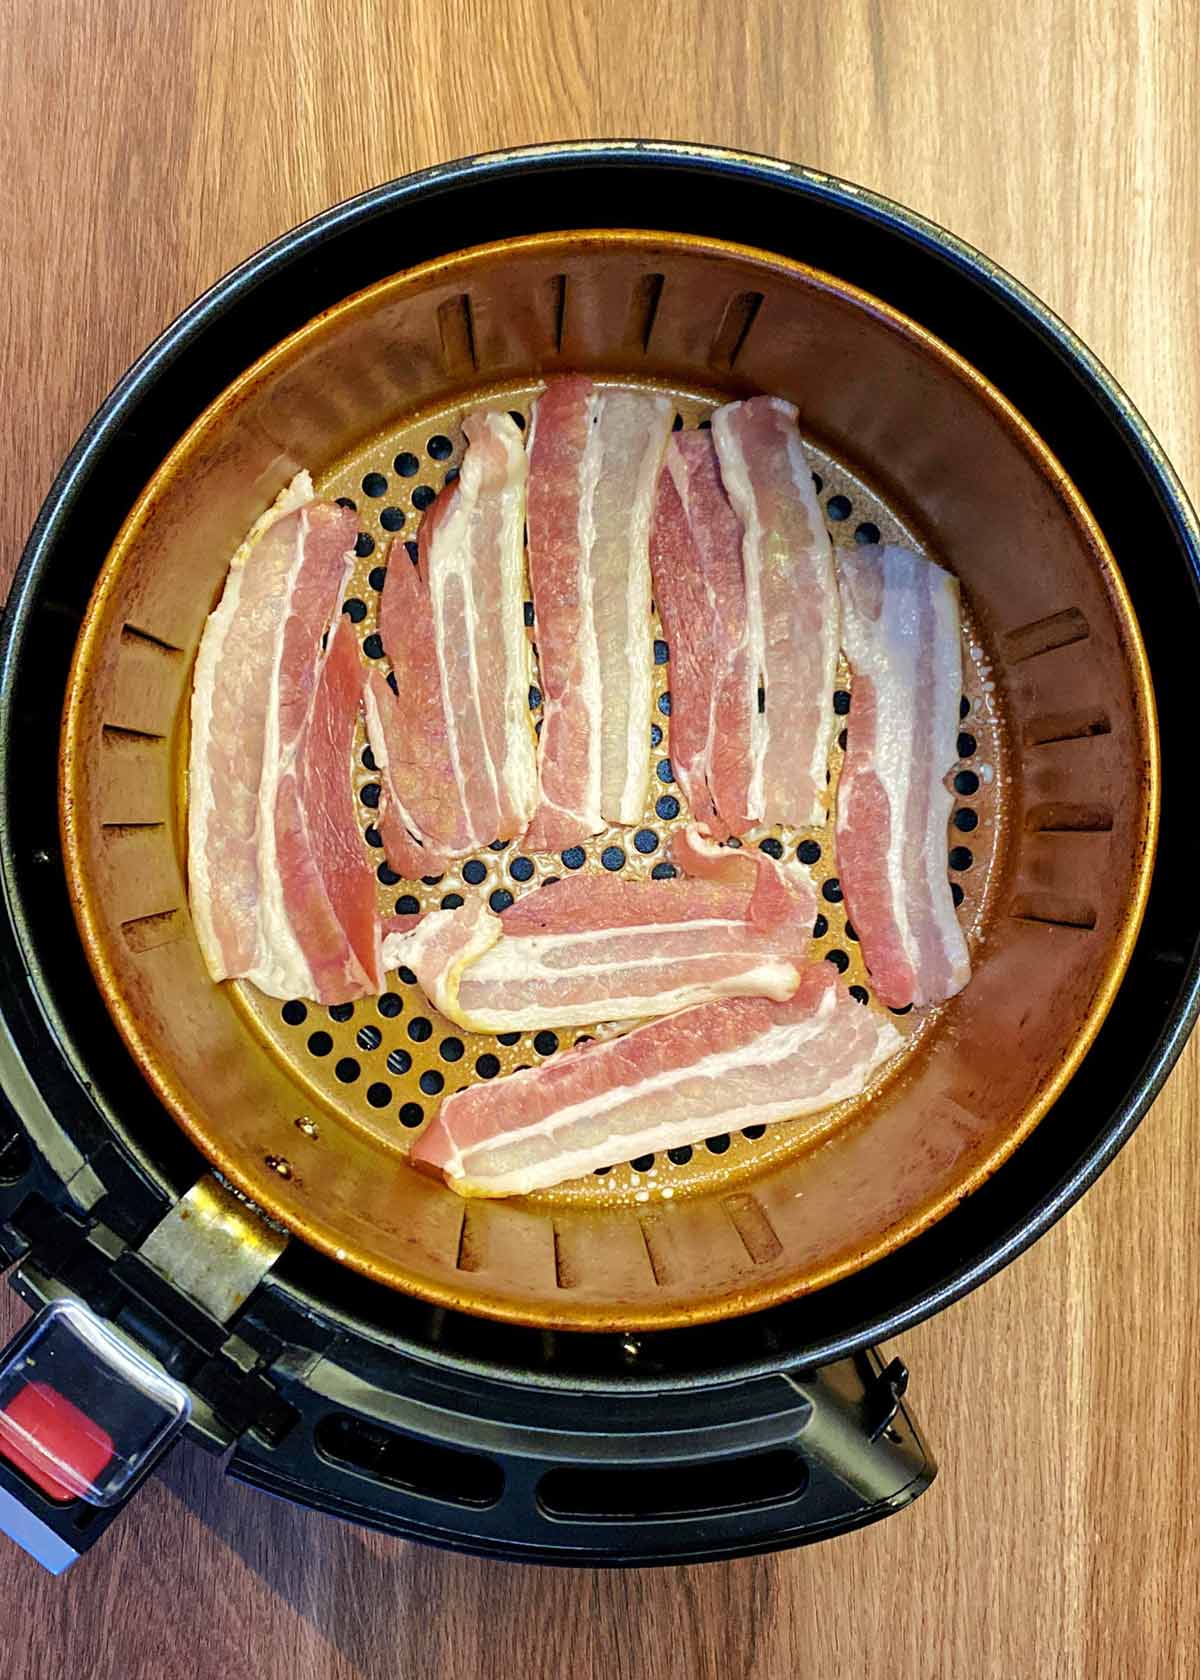 An oiled air fryer basket with rashers of uncooked bacon in it.